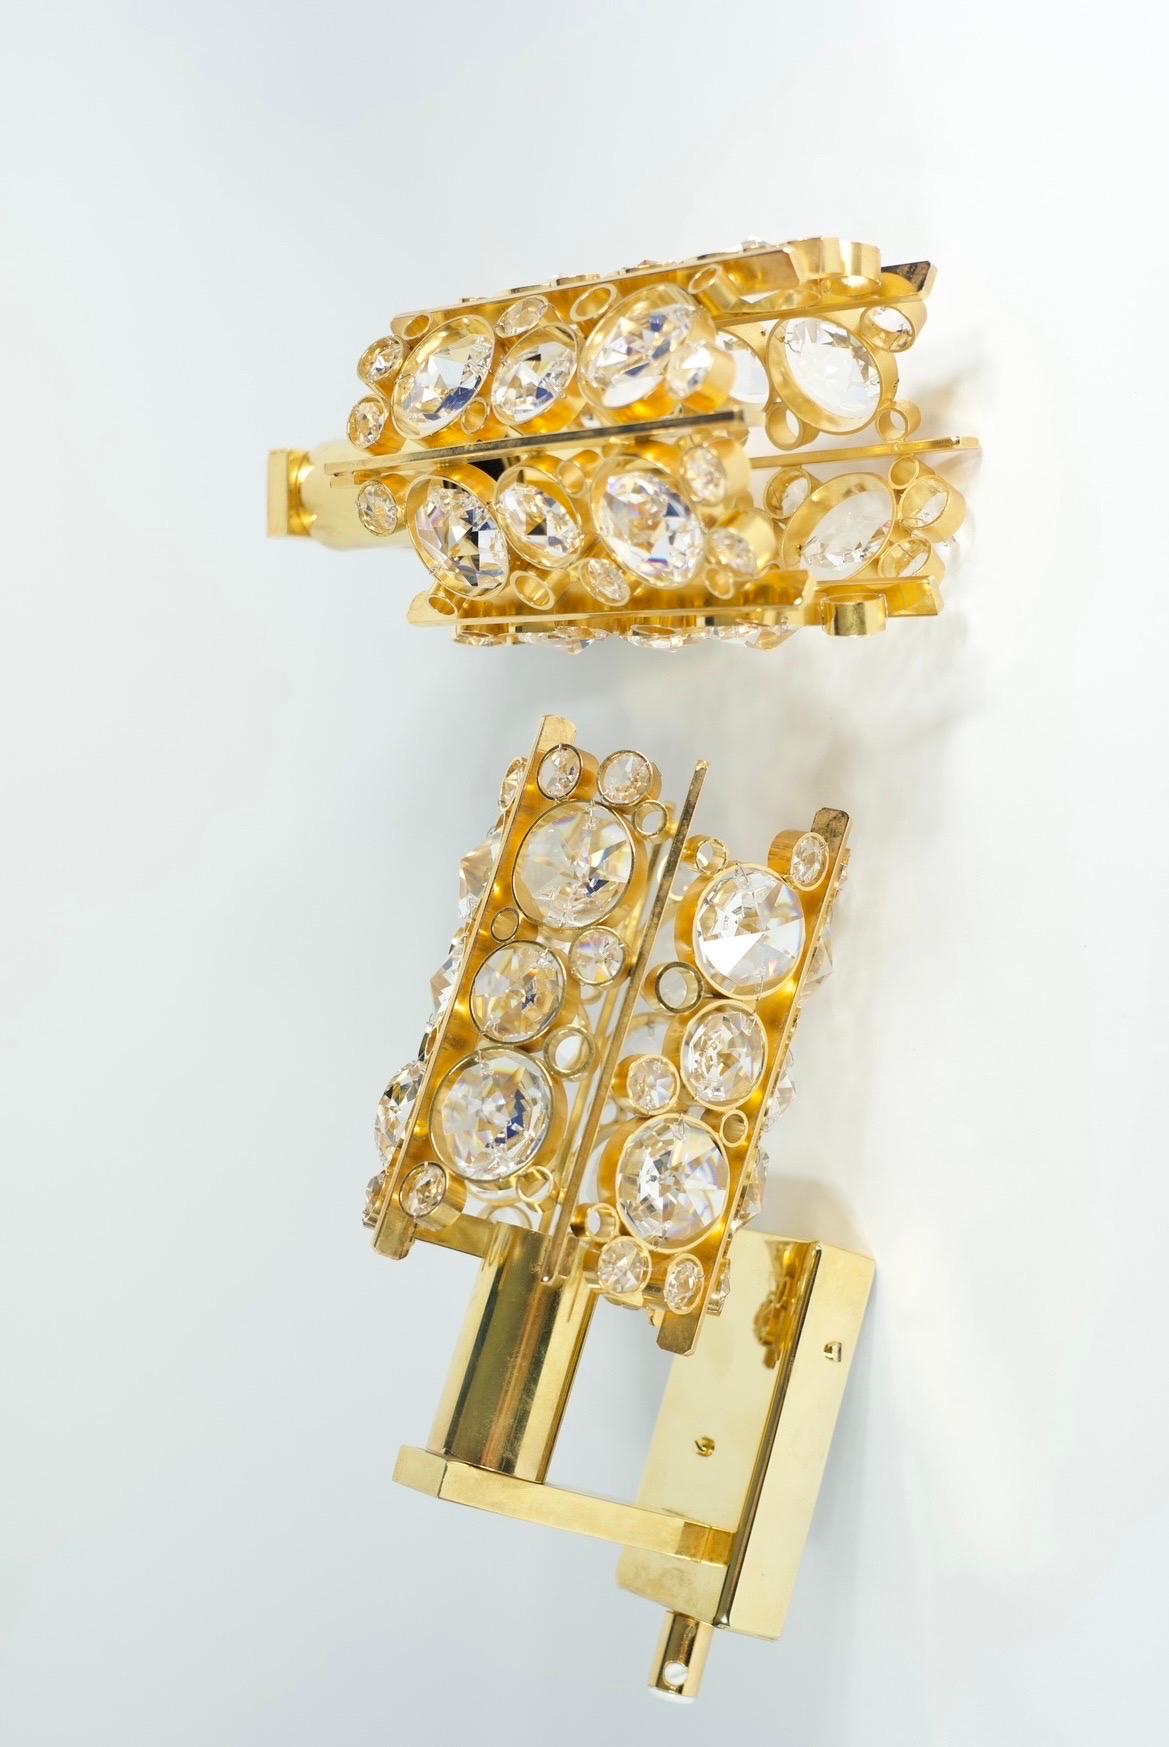 20th Century Pair of Palwa Sconces Swarovski Crystals on a Gold-Plated Frame, Vienna, 1960 For Sale